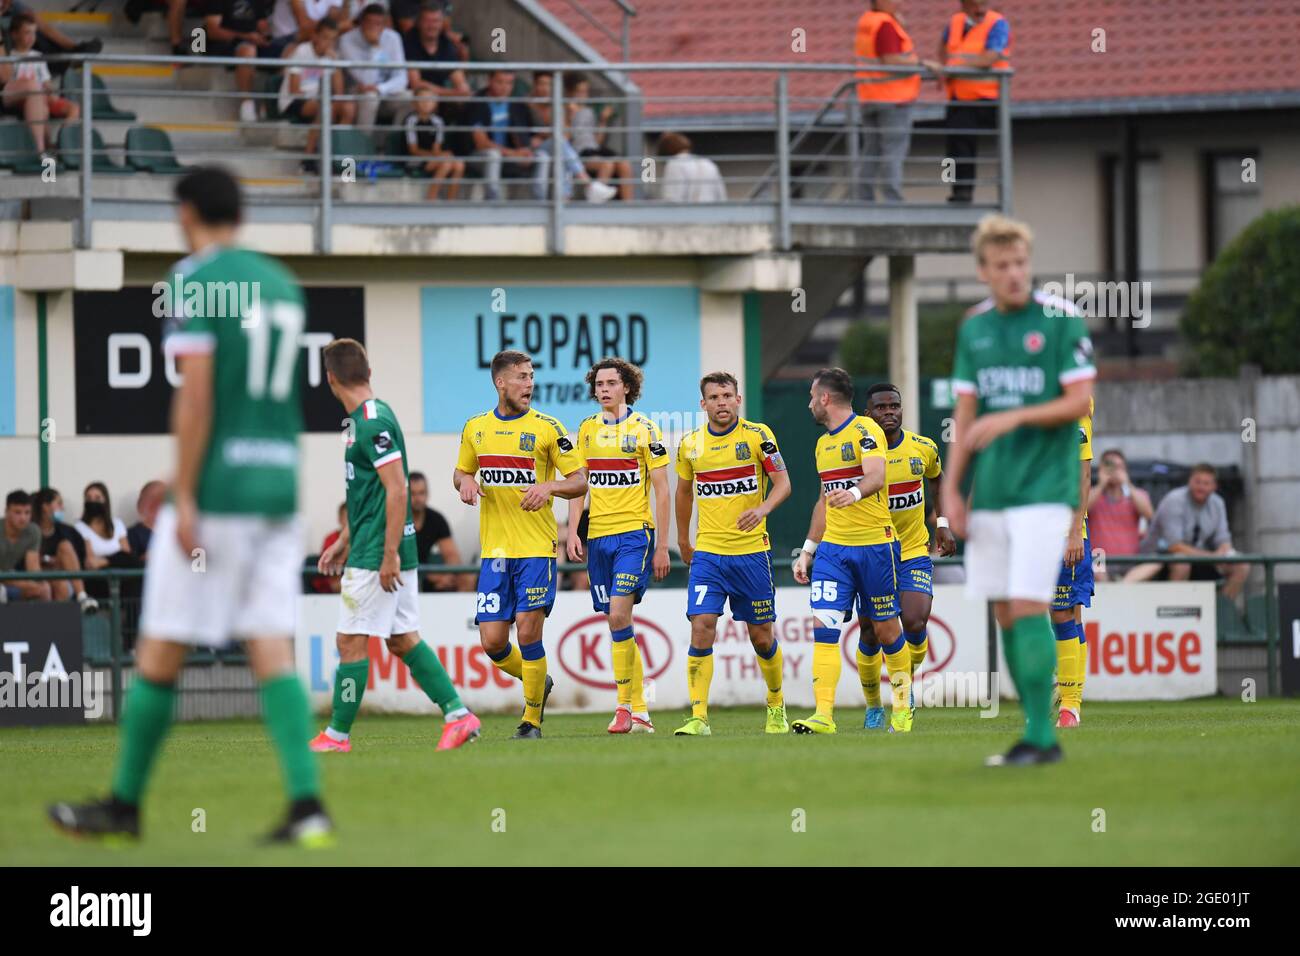 Westerlo's Lukas Van Eeno celebrates after scoring during a soccer match between Royal Excelsior Virton and KVC Westerlo, Sunday 15 August 2021 in Vir Stock Photo